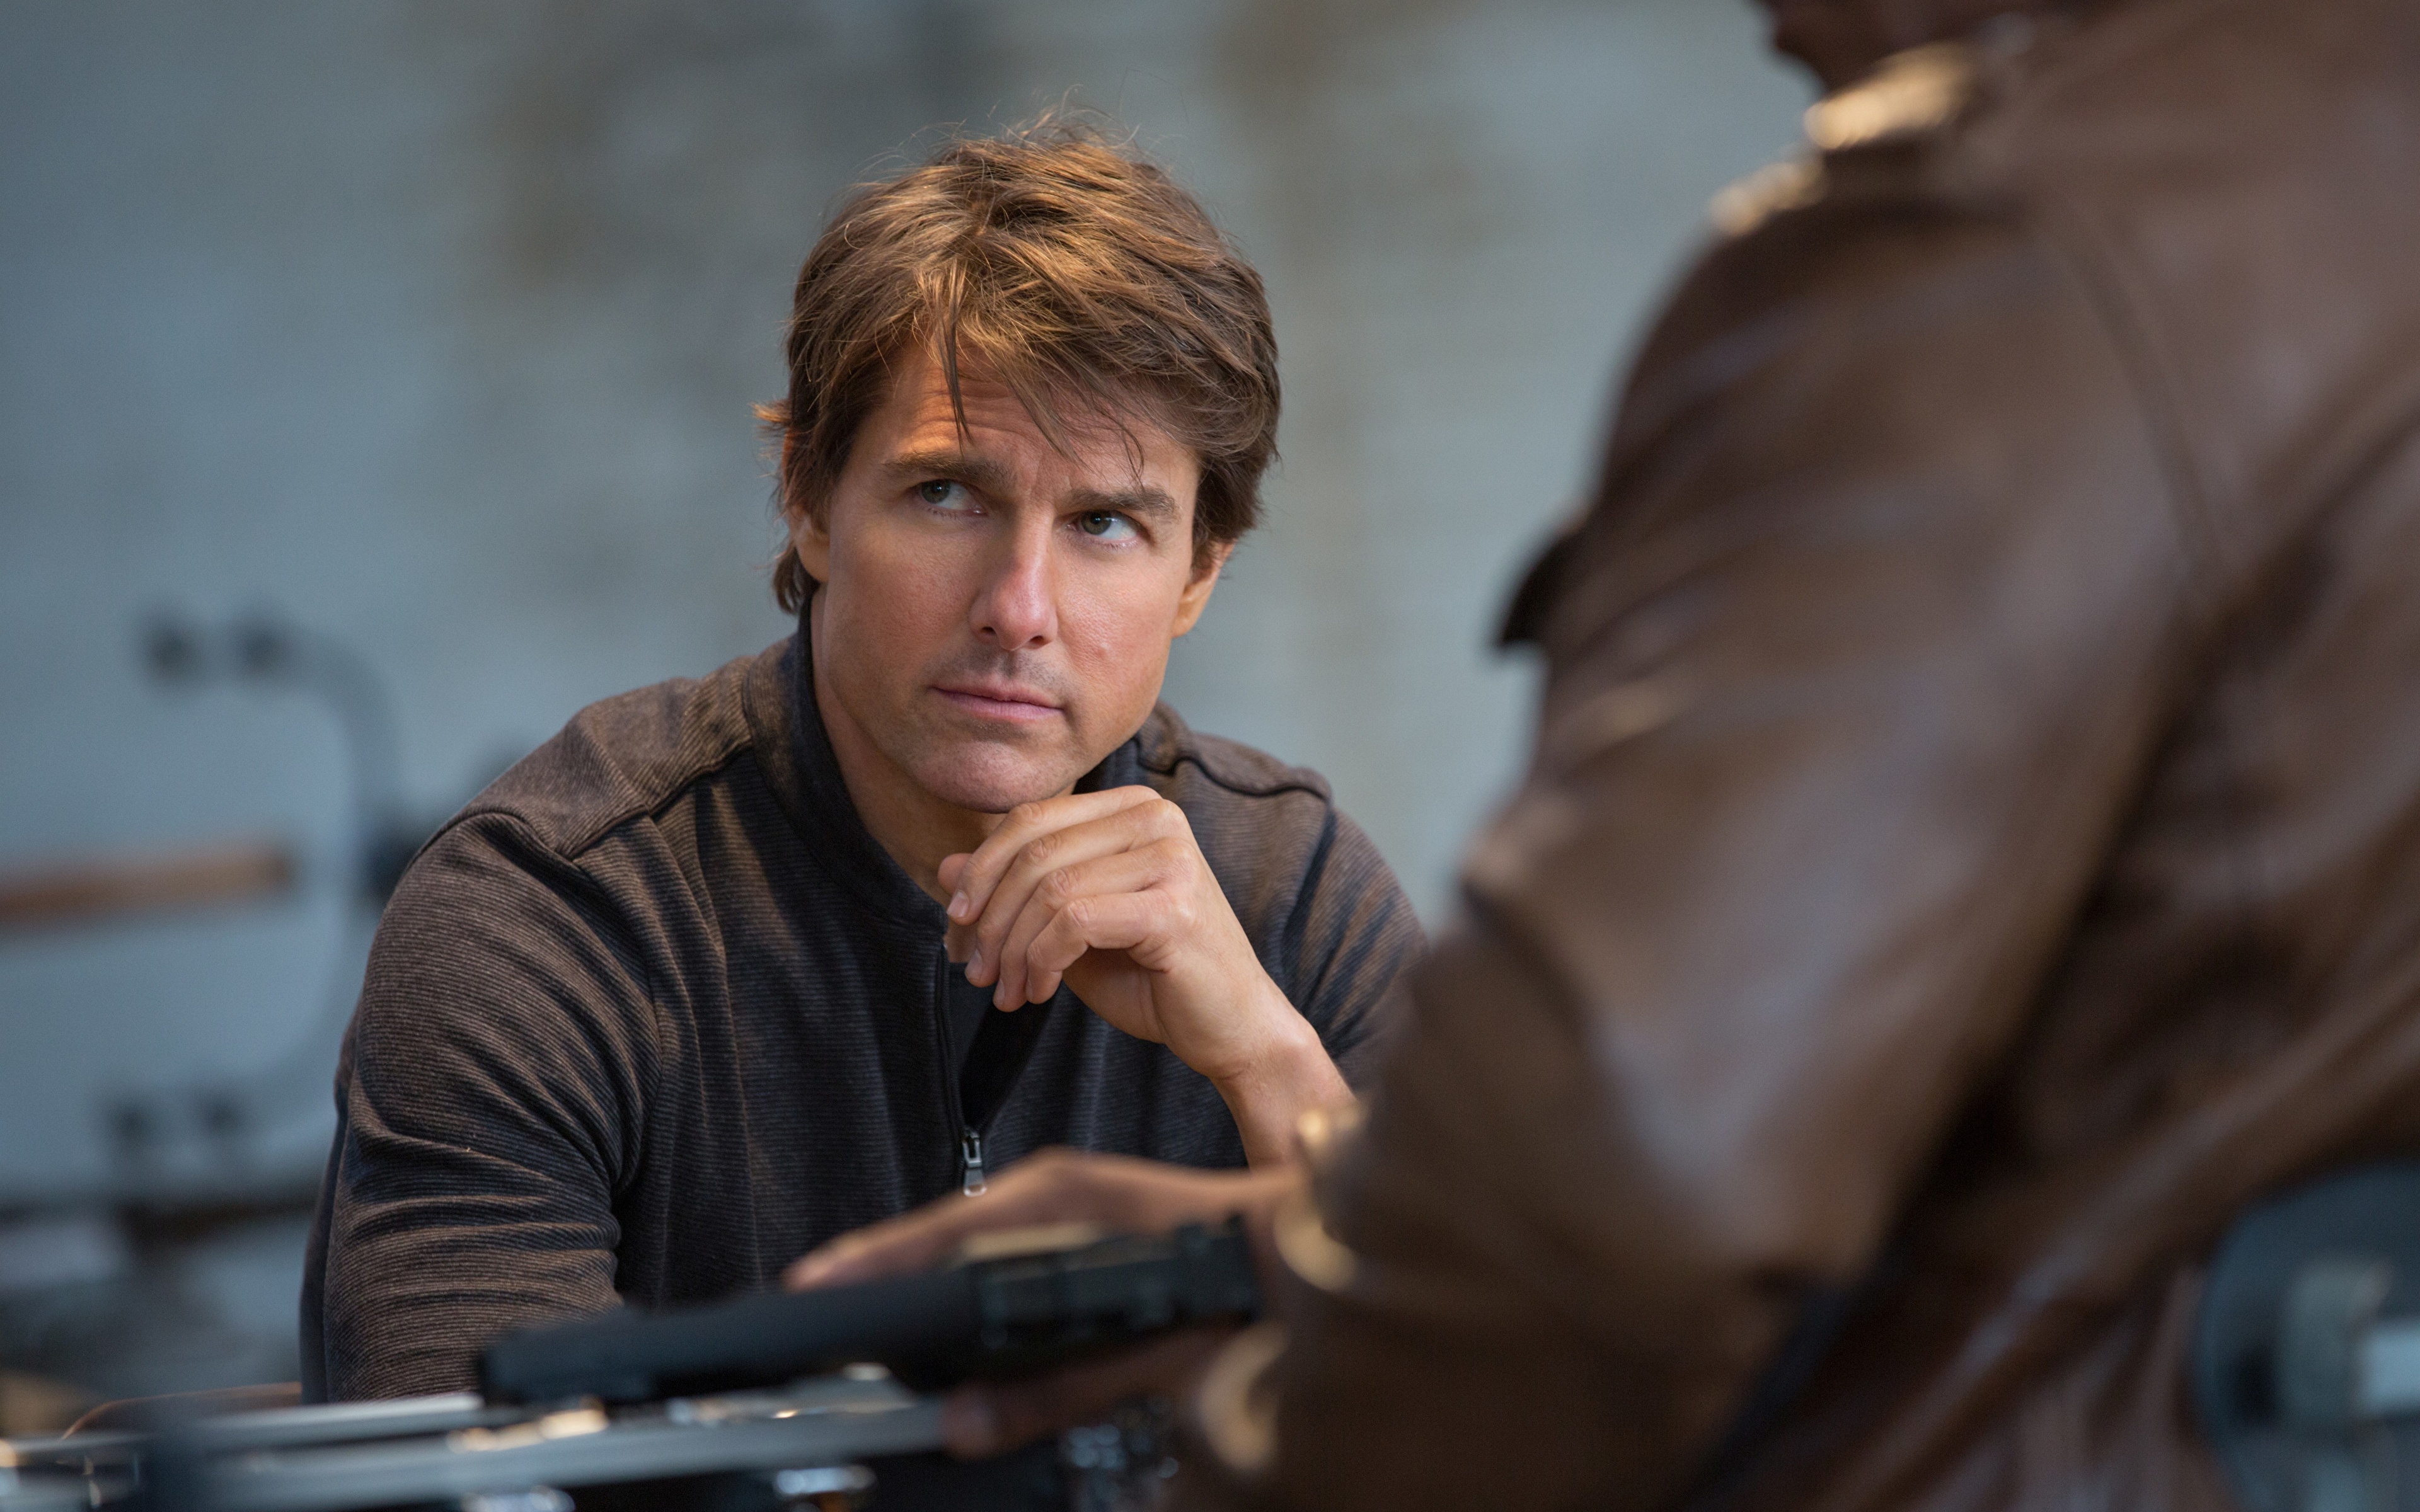 Wallpaper Mission Impossible Tom Cruise Man Rogue Nation